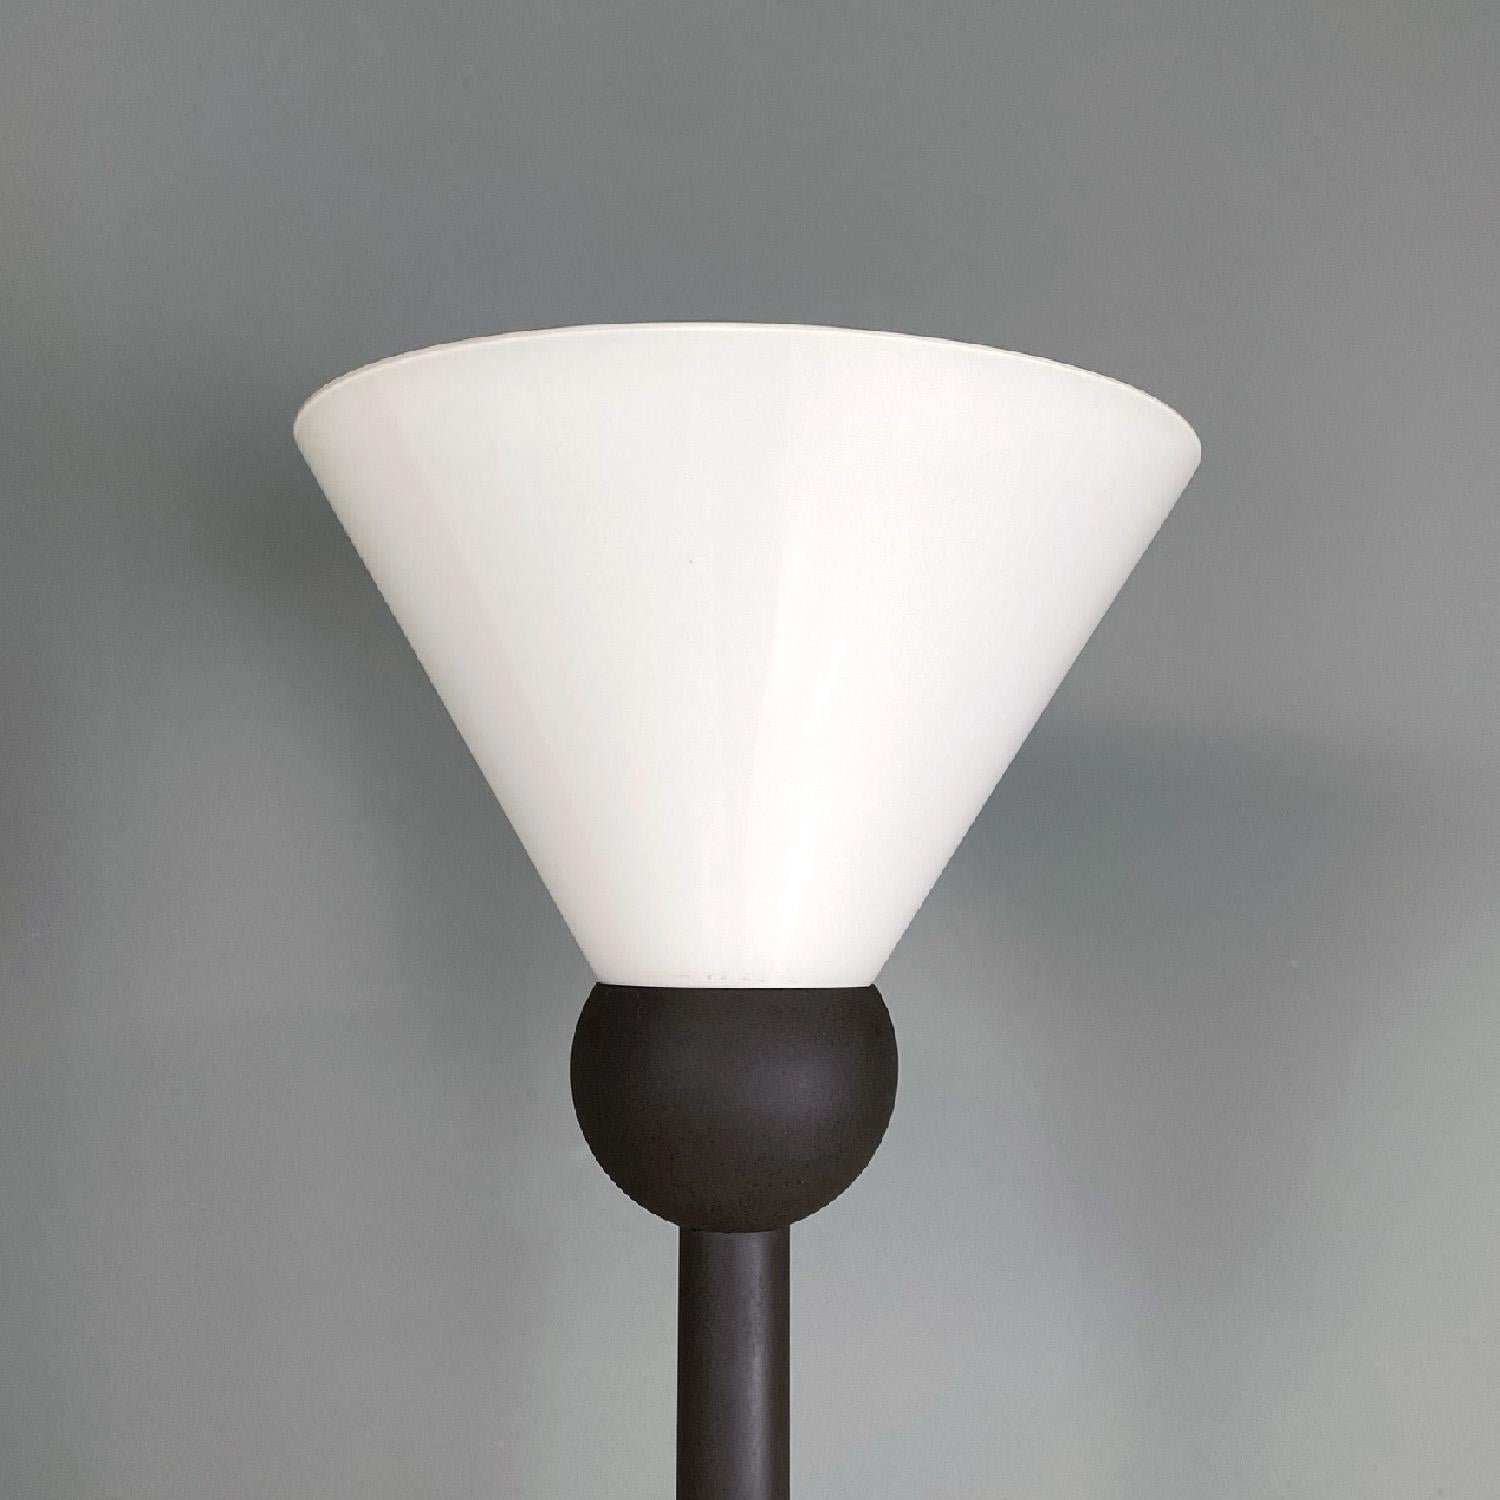 Modern Italian modern white glass and metal floor lamp by Roberto Freno for VeArt 1980s For Sale